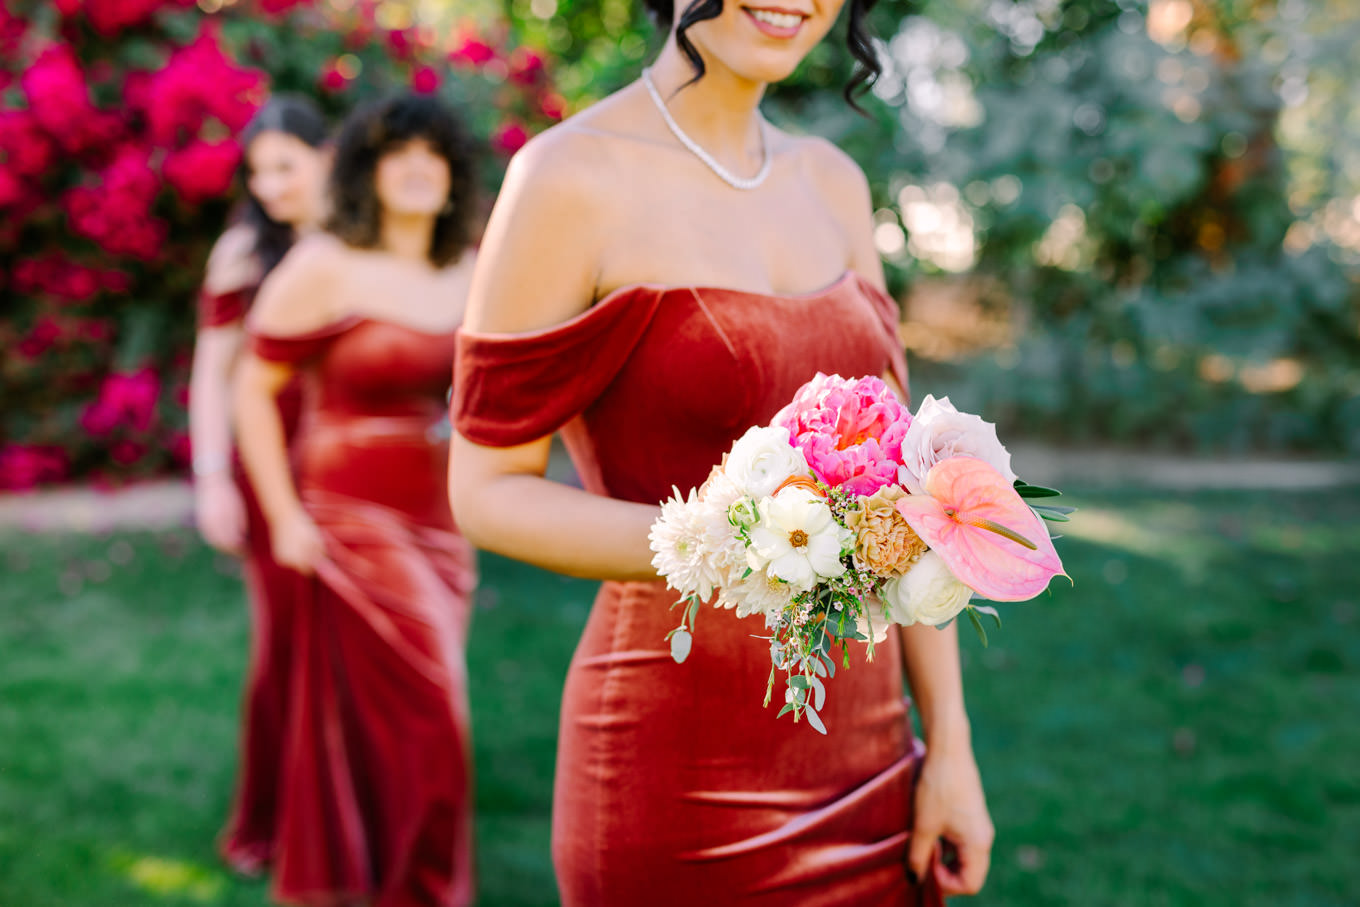 Bridesmaids bouquets | Pink Bougainvillea Estate wedding | Colorful LA wedding photography | #bougainvilleaestate #palmspringswedding #palmspringsweddingvenue #palmspringsphotographer Source: Mary Costa Photography | Los Angeles